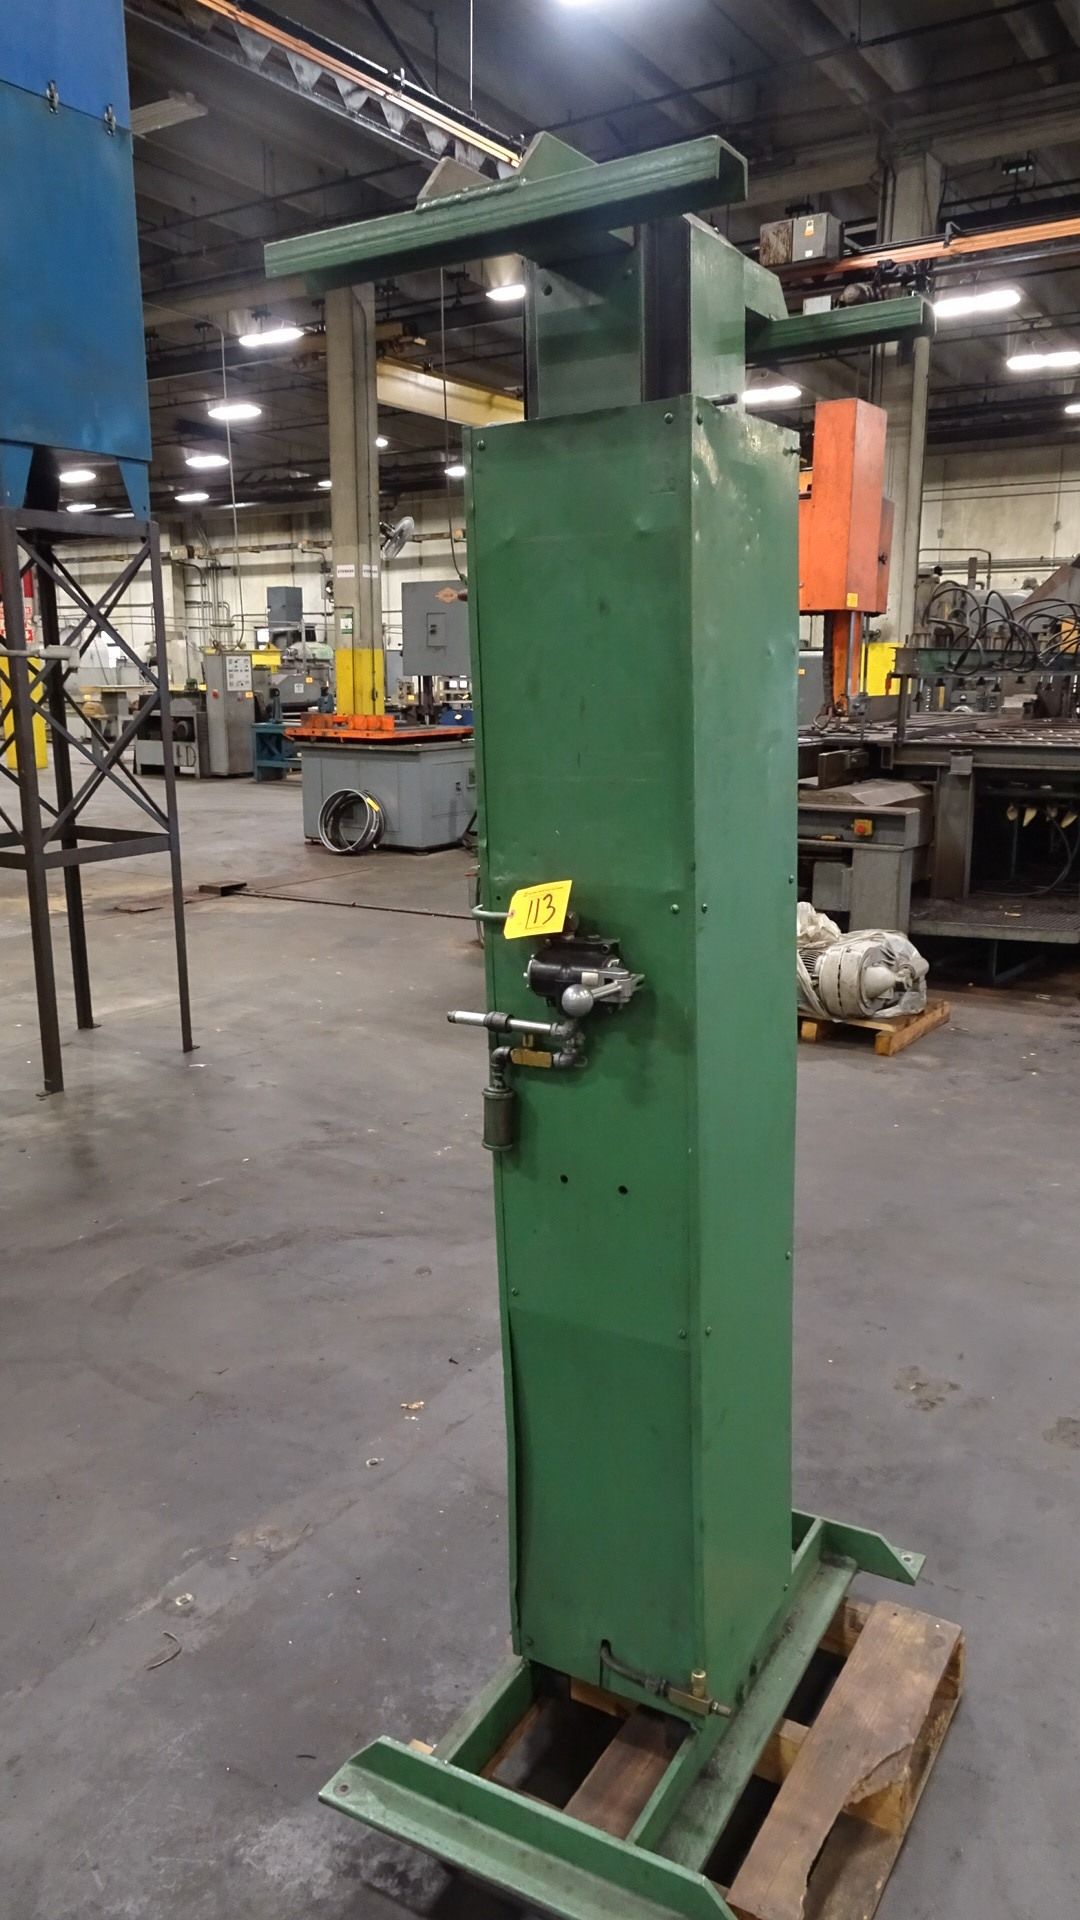 5-1/2' Pneumatic Lift with Approx 5' Maximum Lifting Capability